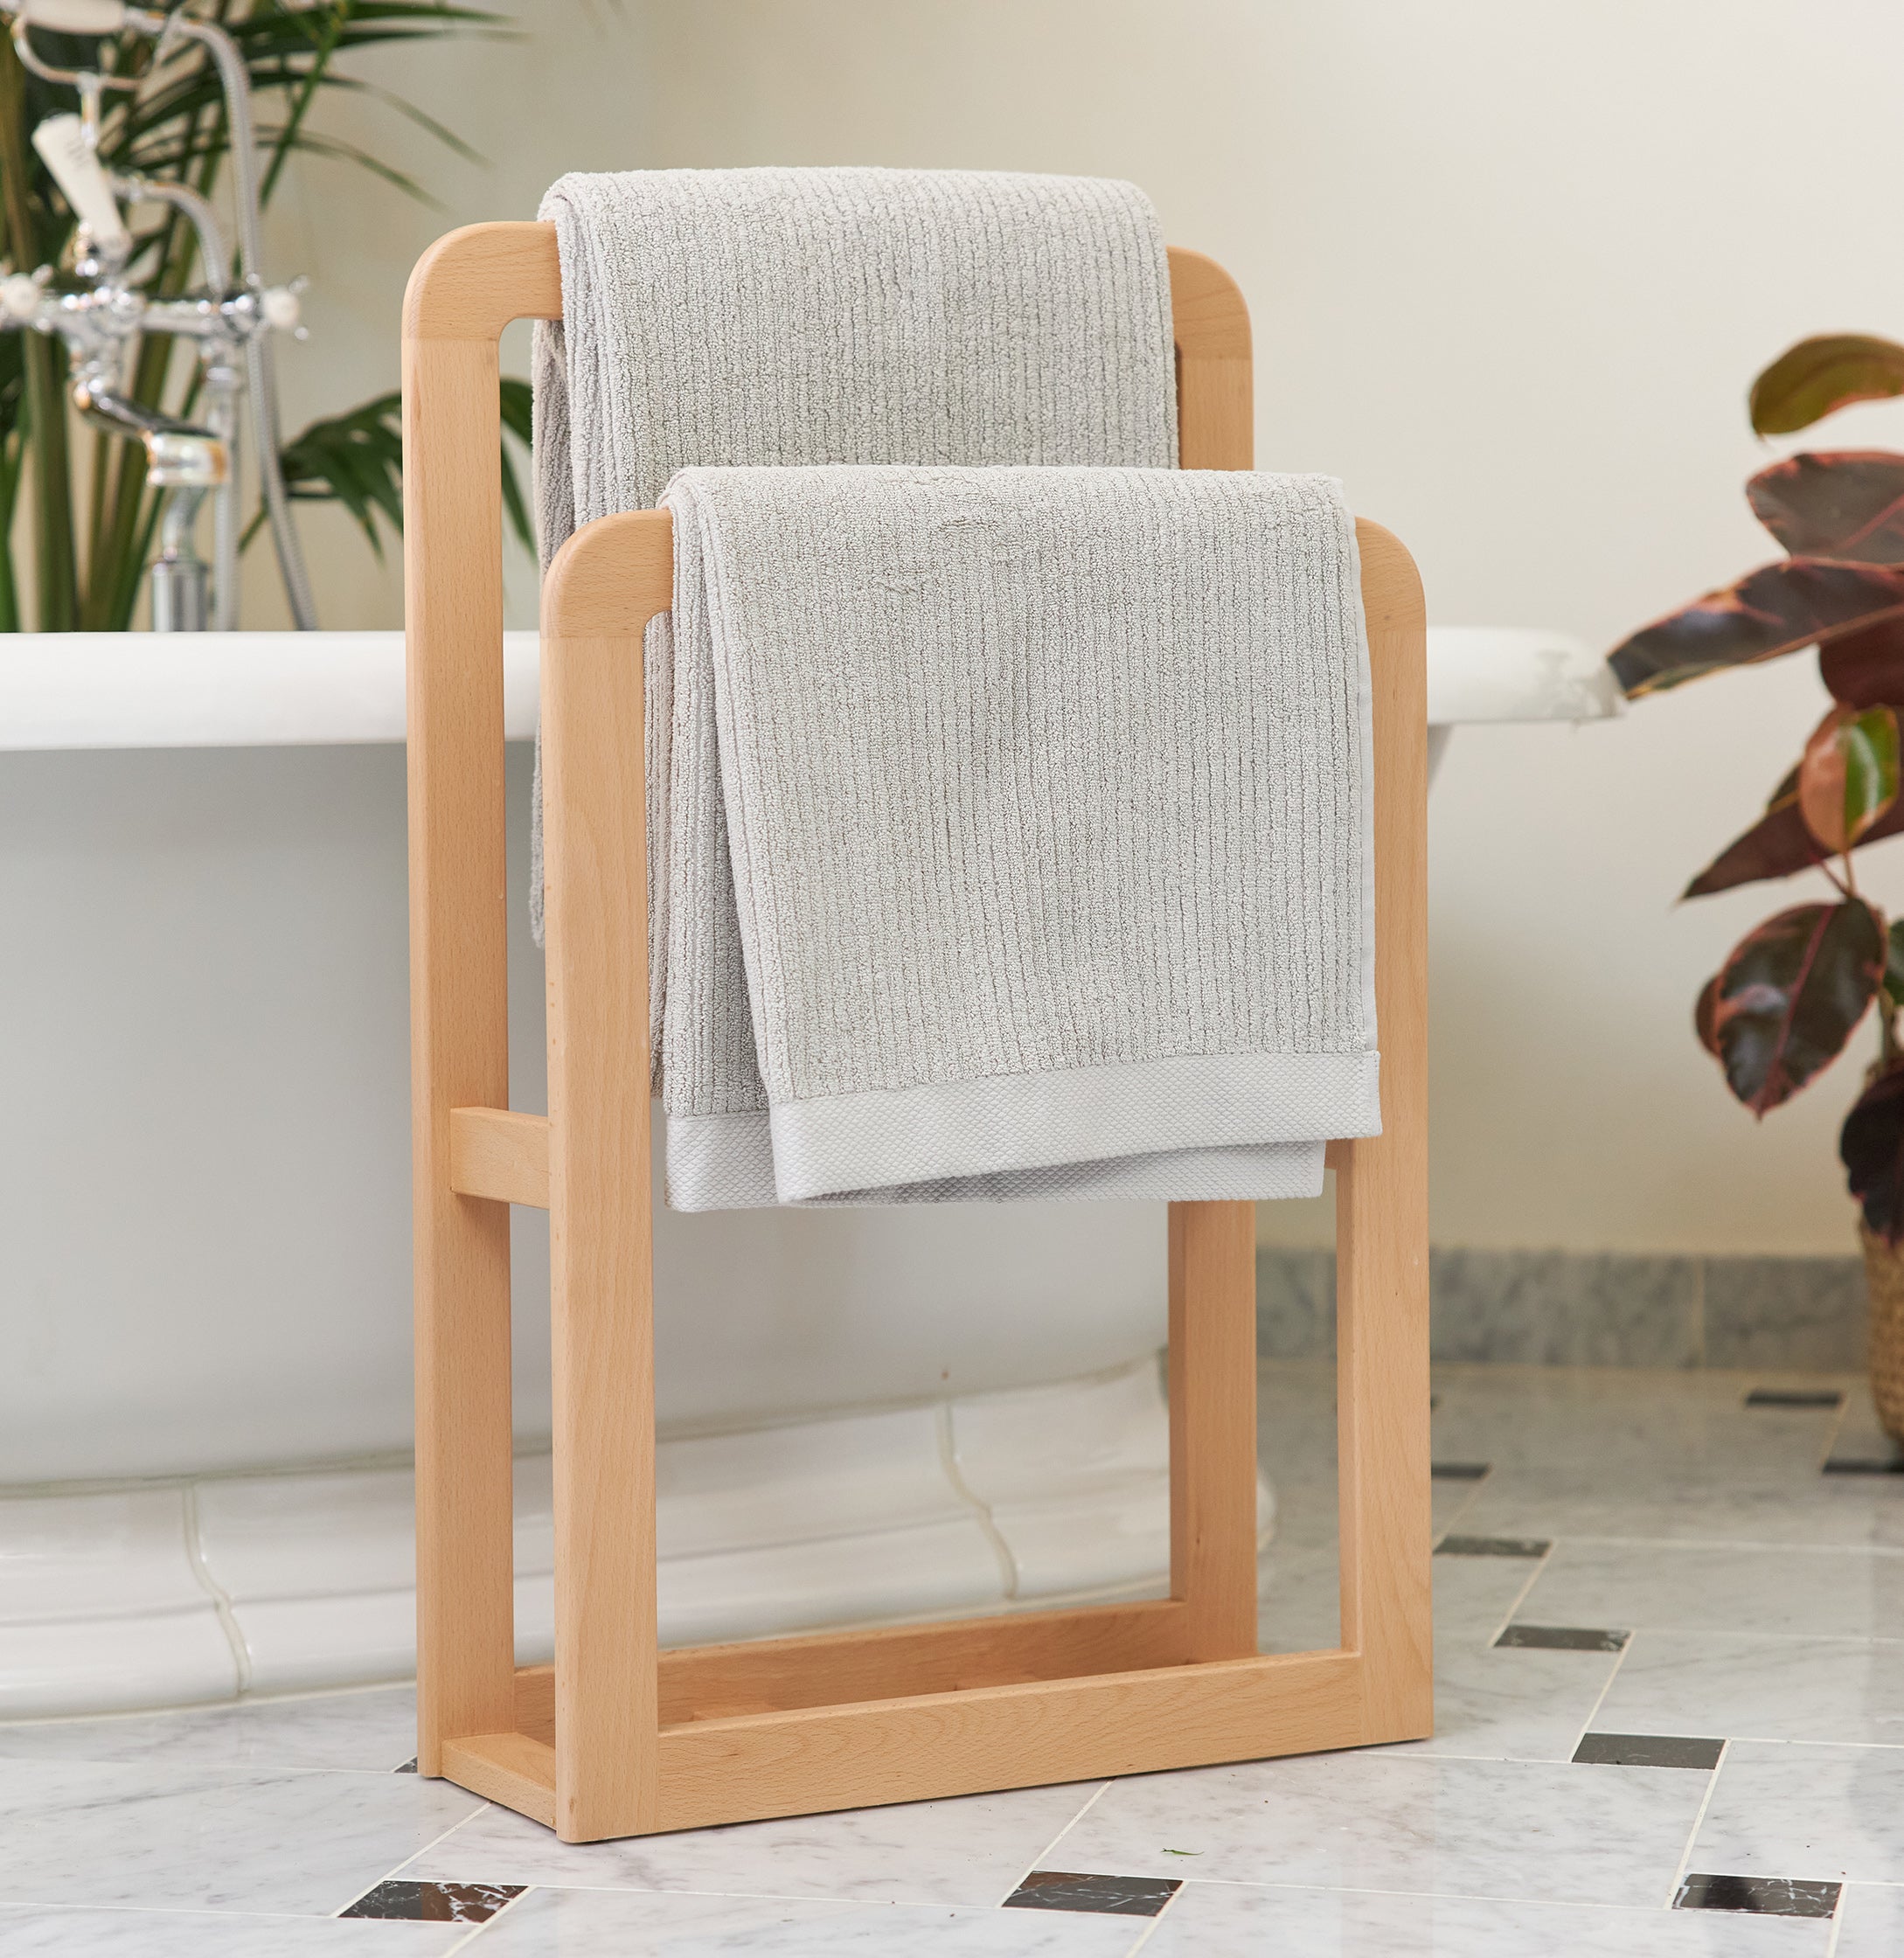 Dravin Hanging Bamboo Shower Caddy